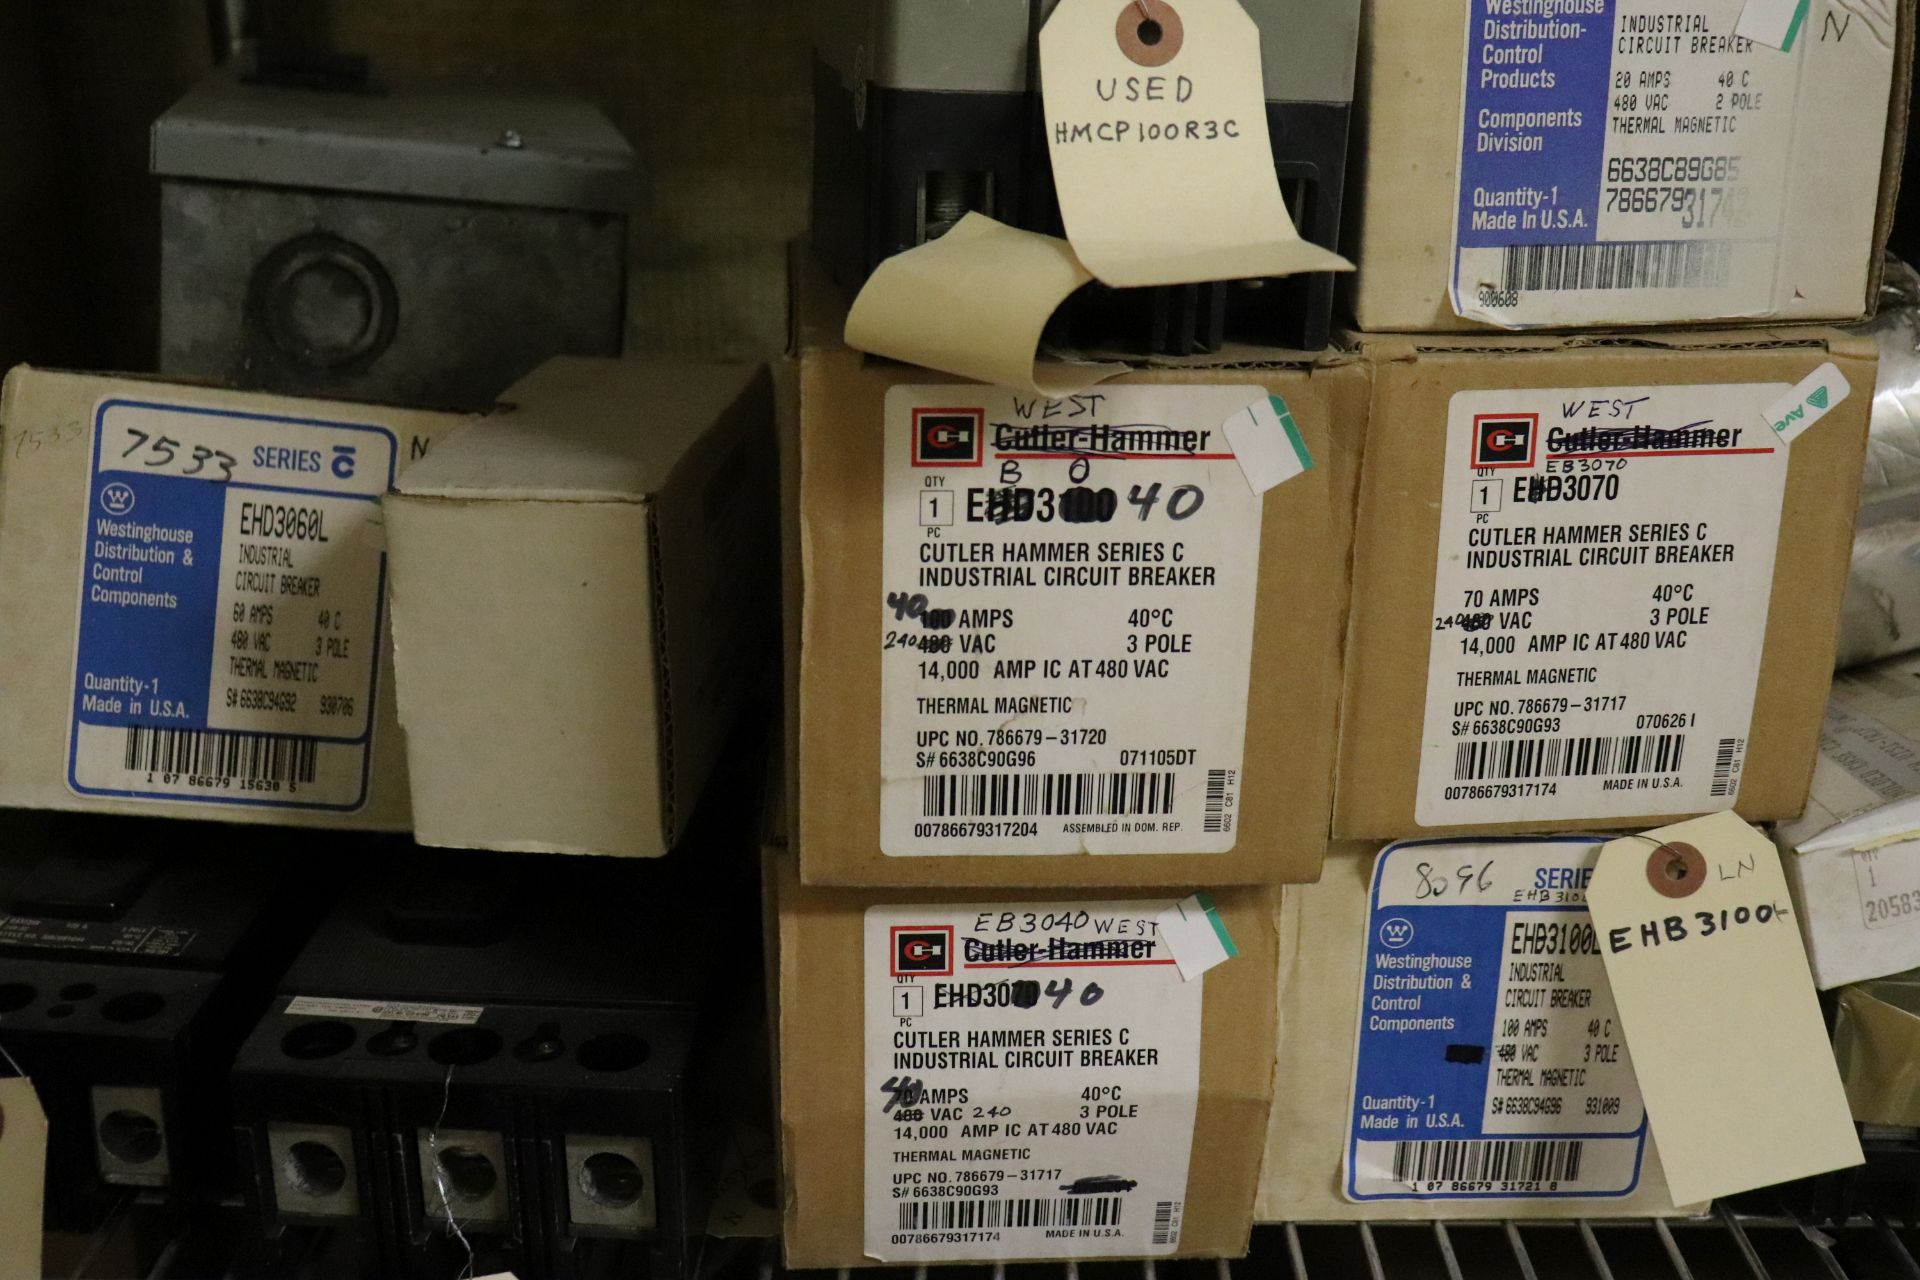 All items on shelf including circuit breaker frames, circuit breakers, and interlock receptacle - Image 2 of 4